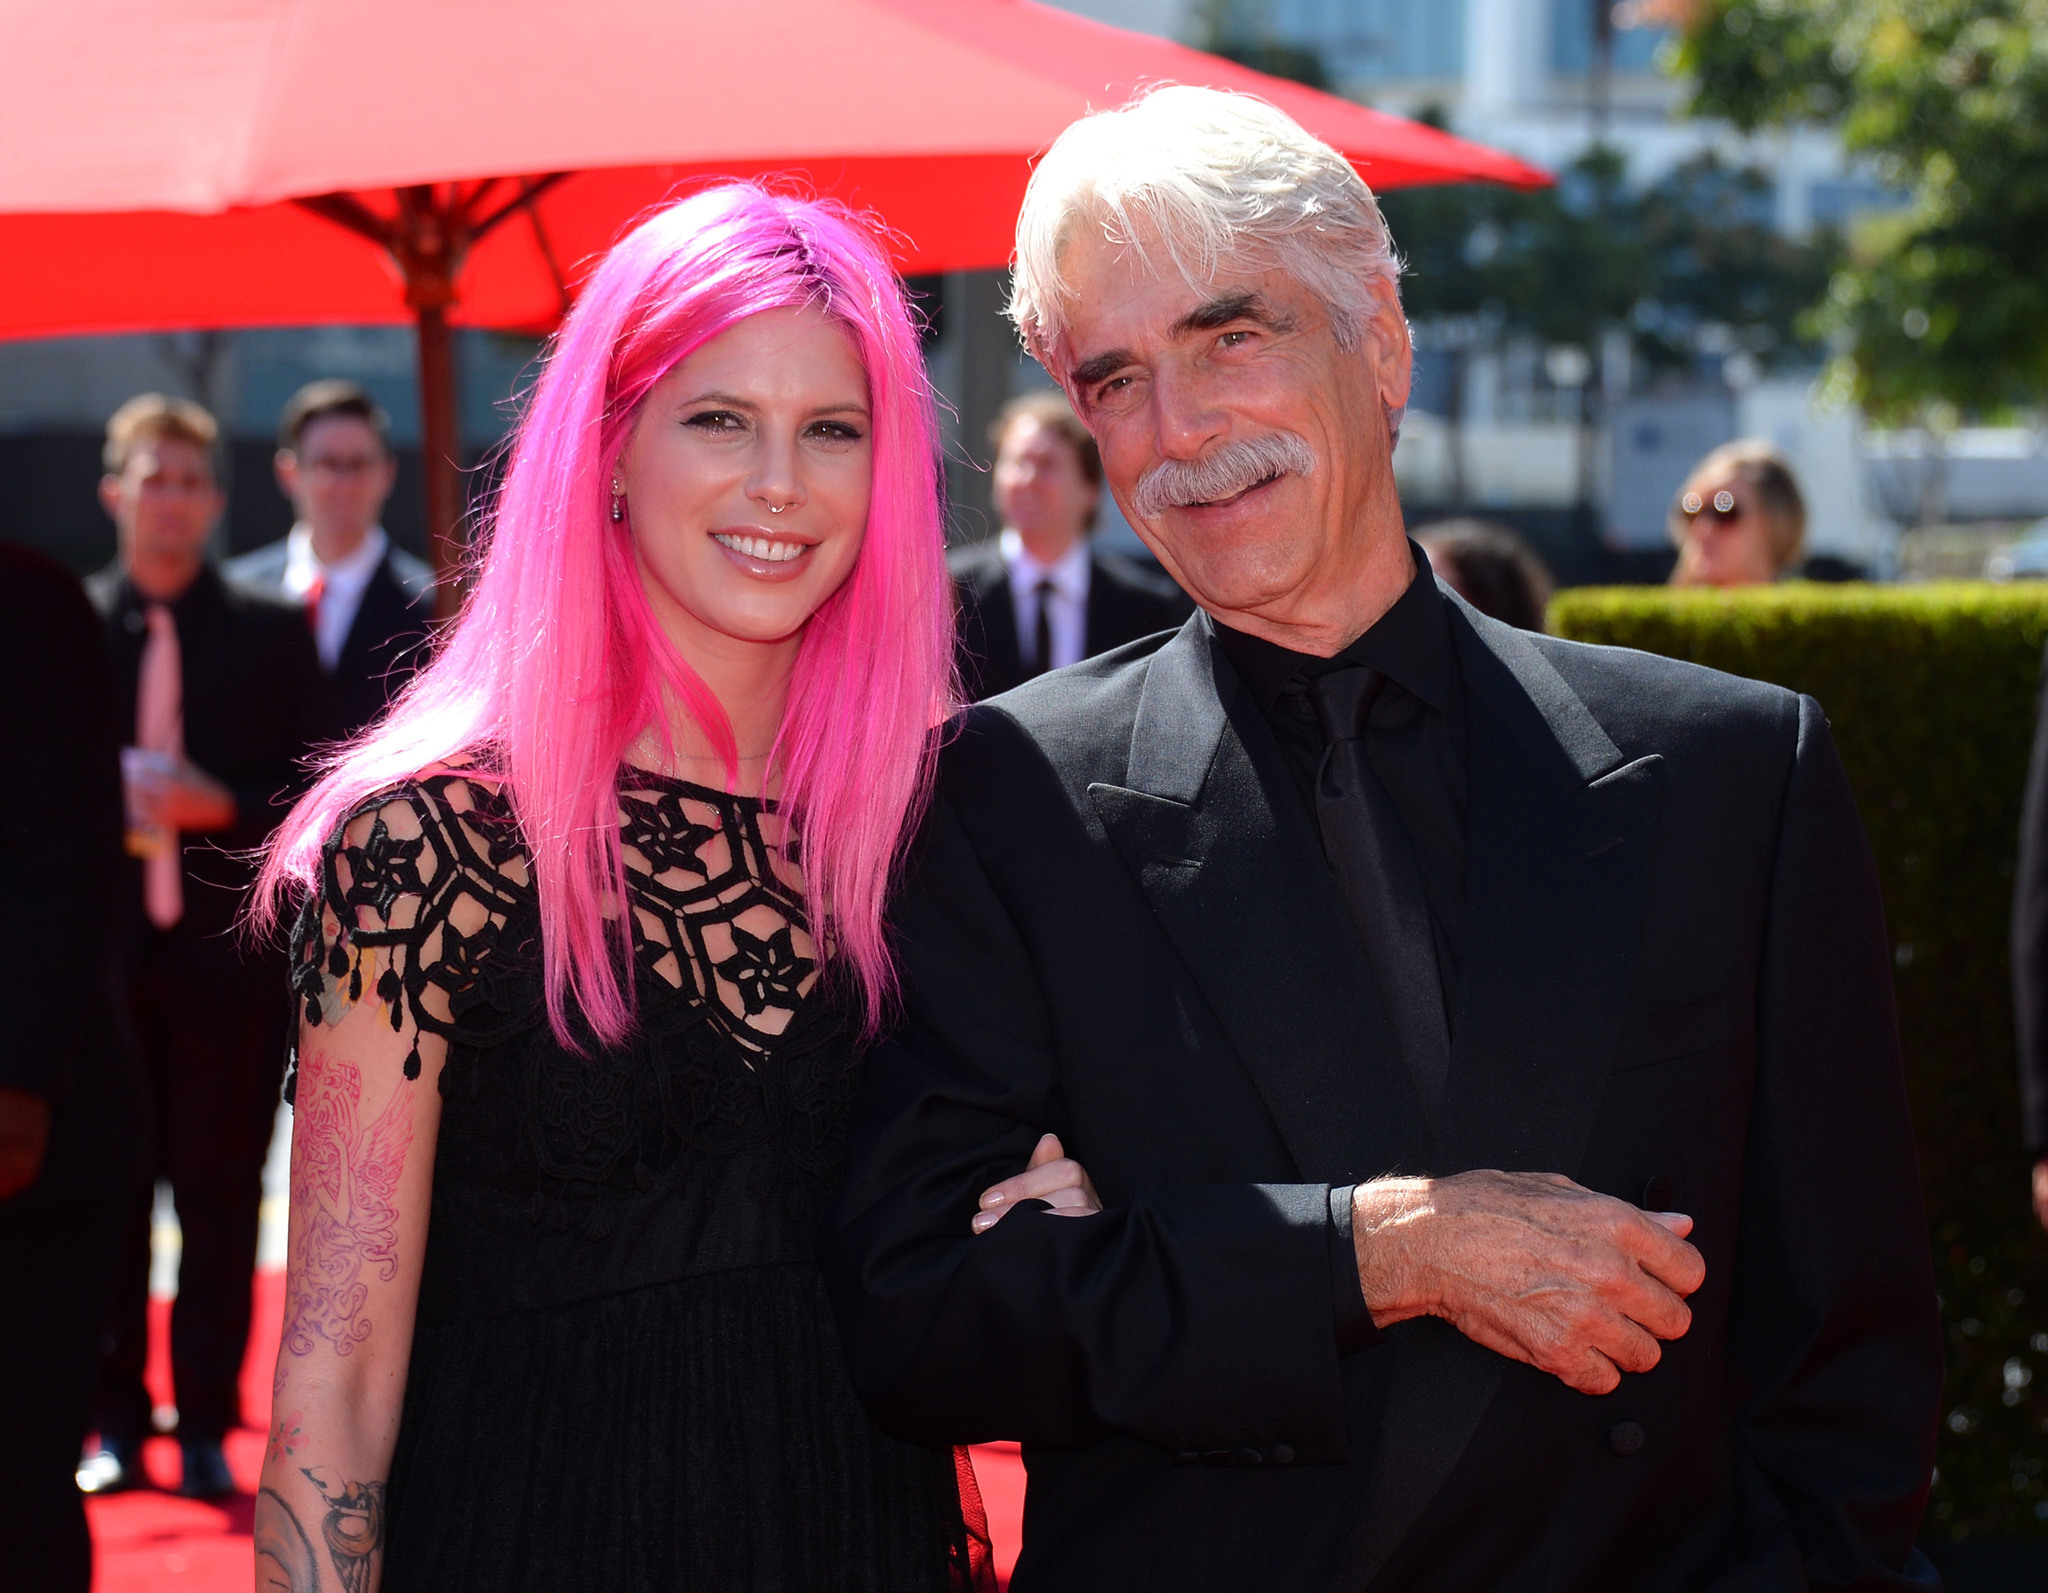 Cleo Cole Elliott (L) and actor Sam Elliott pose at the 2013 Creative Arts Emmy Awards held at the Nokia Theatre L.A. Live on September 15, 2013 in Los Angeles, California.